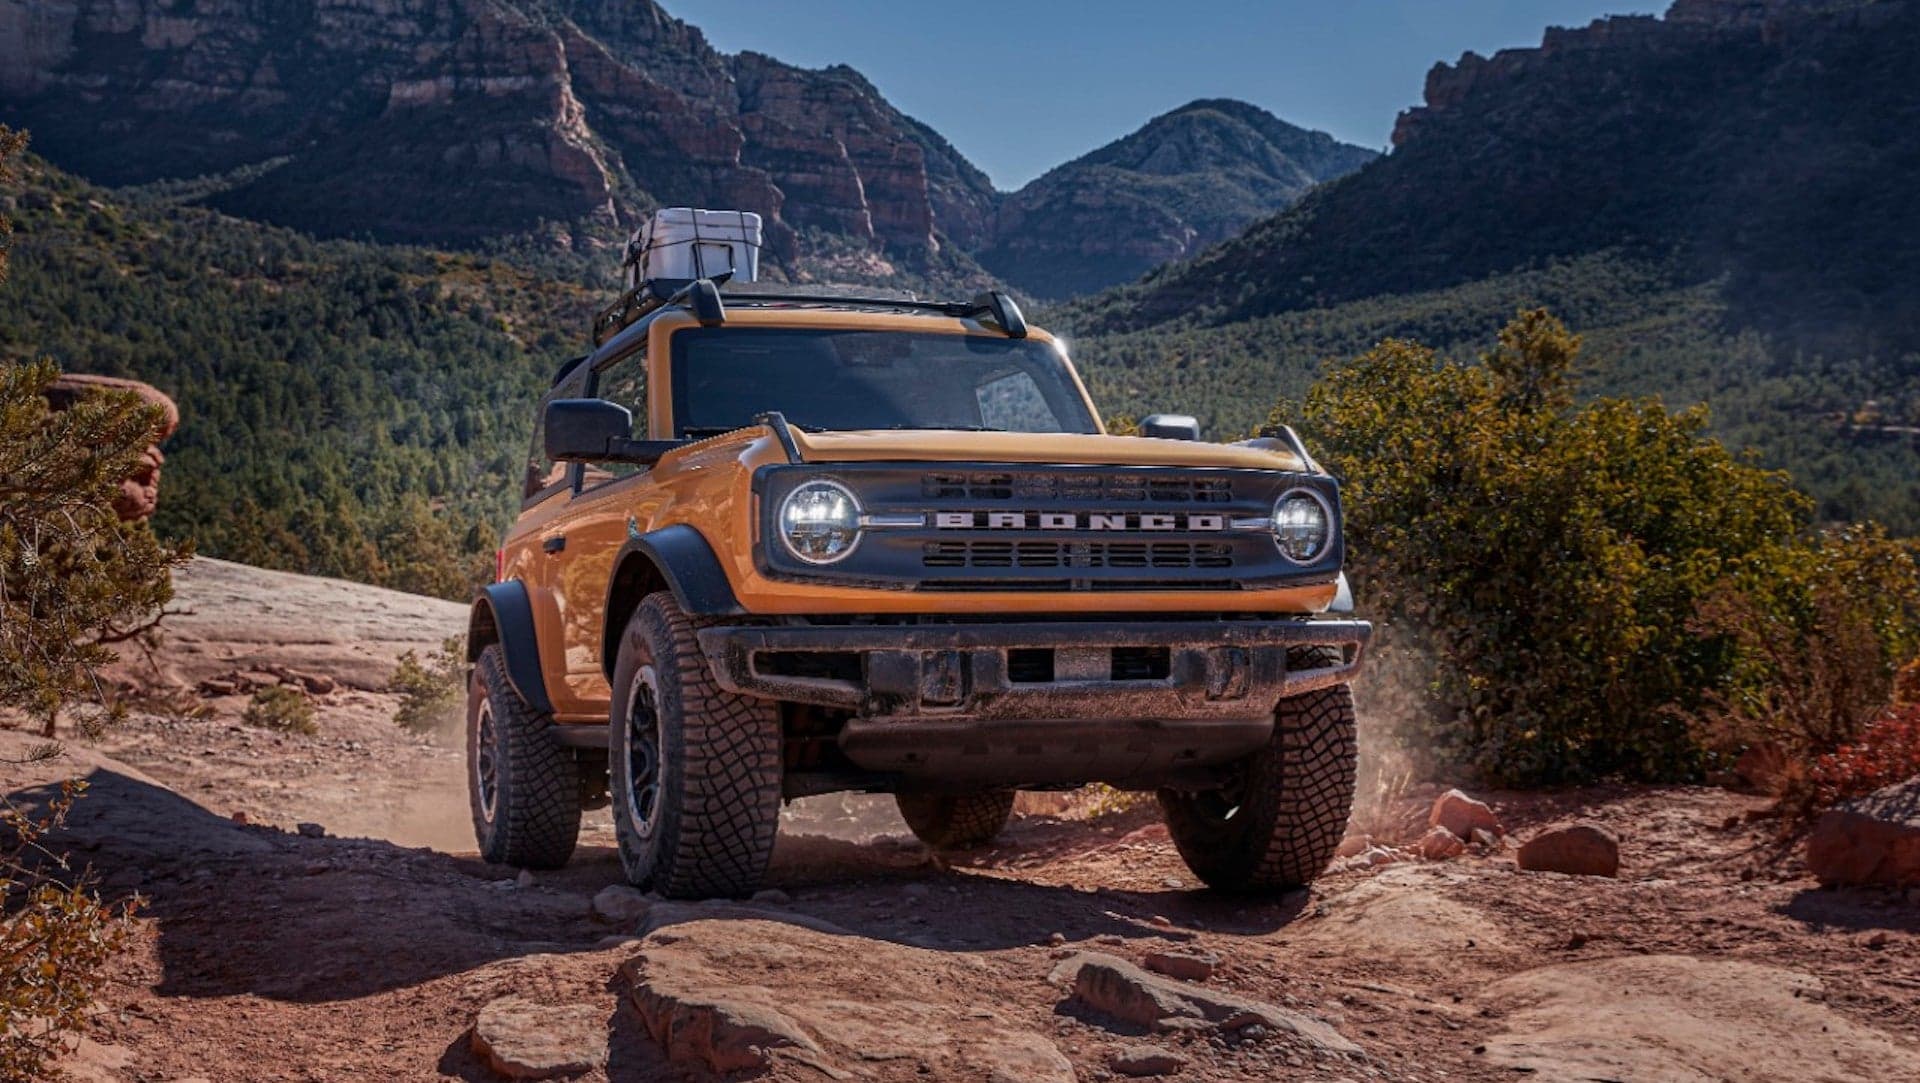 If You Want to Reserve a 2021 Ford Bronco, You’ll Have to Do It in Person Now